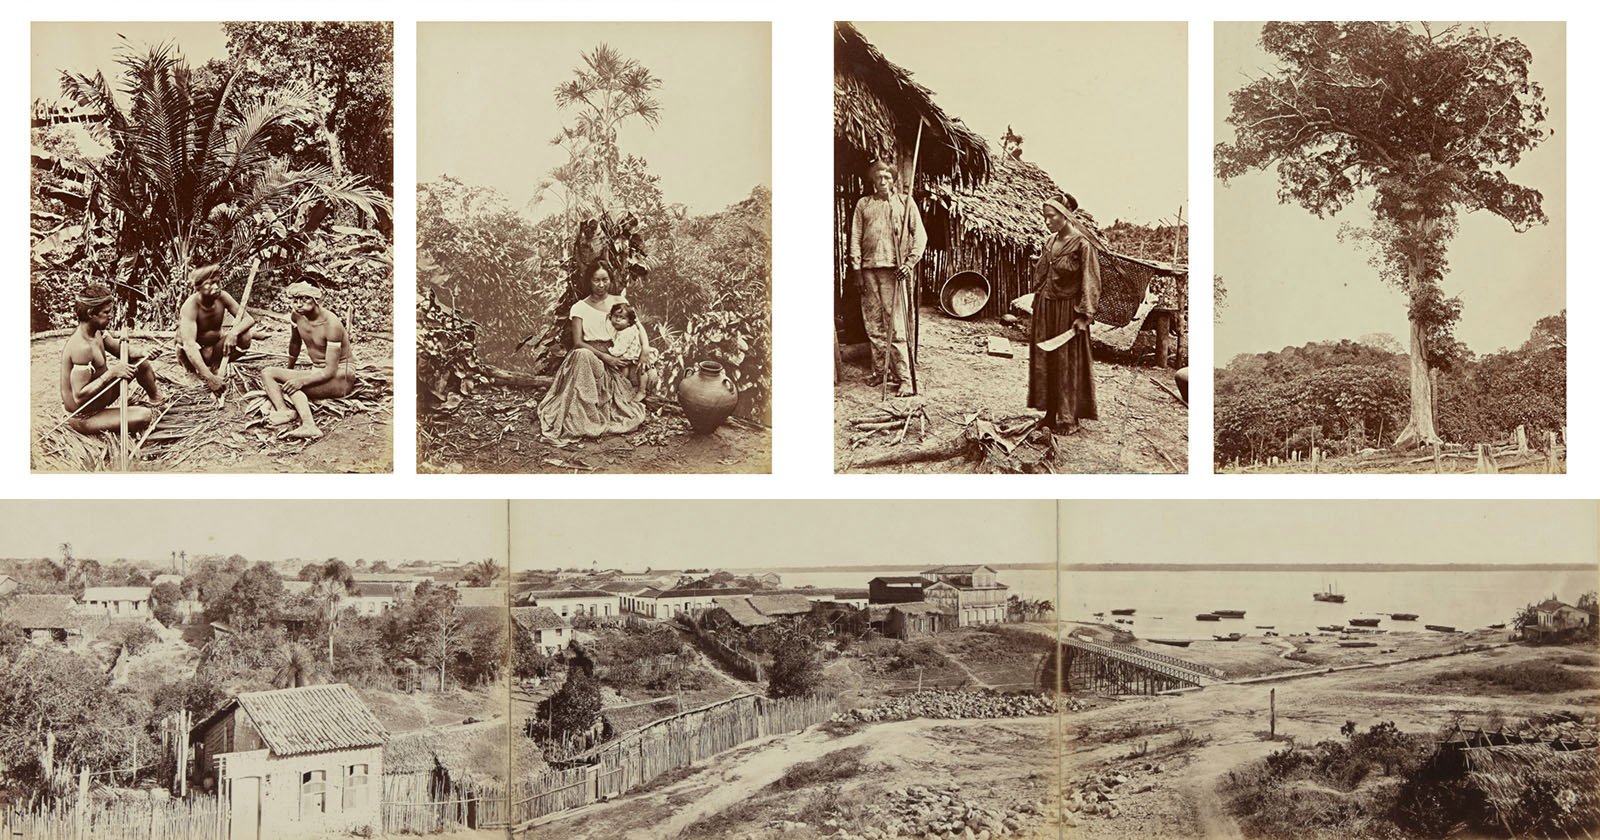 These 150-Year-Old Photos of Brazils Amazon Sold at Auction for $81,000